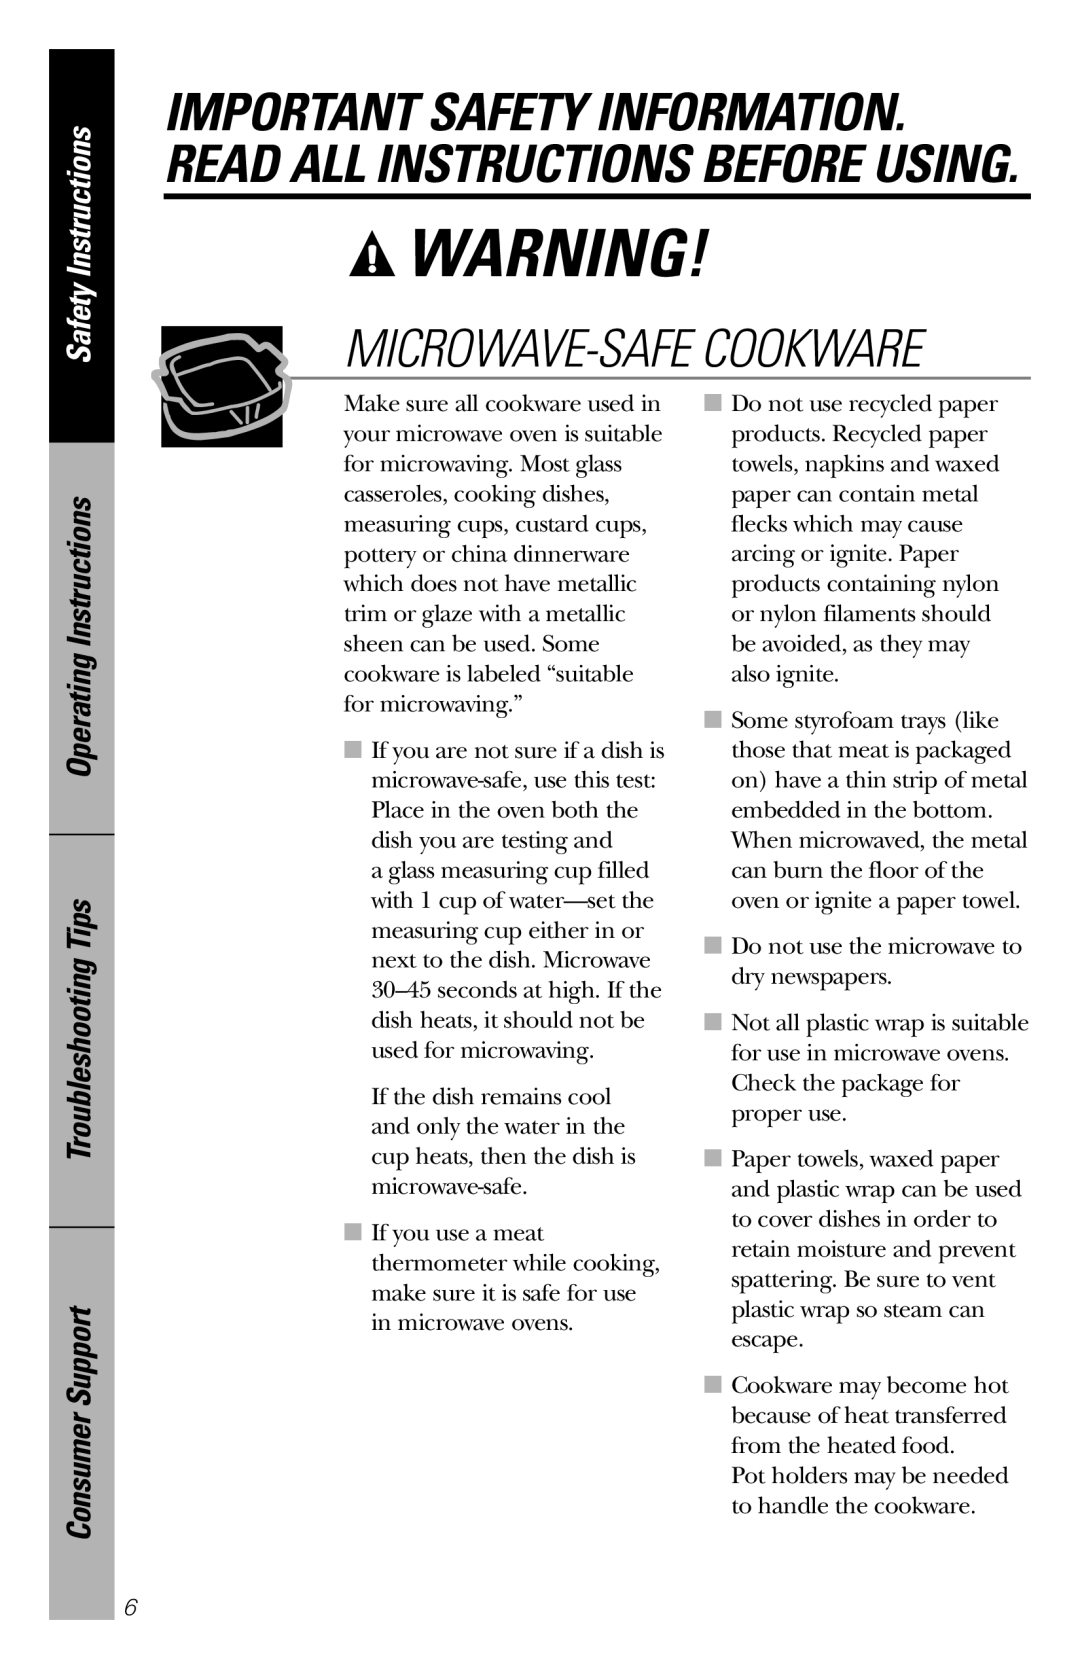 GE PEM31 Microwave-Safecookware, Safety Instructions, Operating Instructions Troubleshooting Tips, Consumer Support 